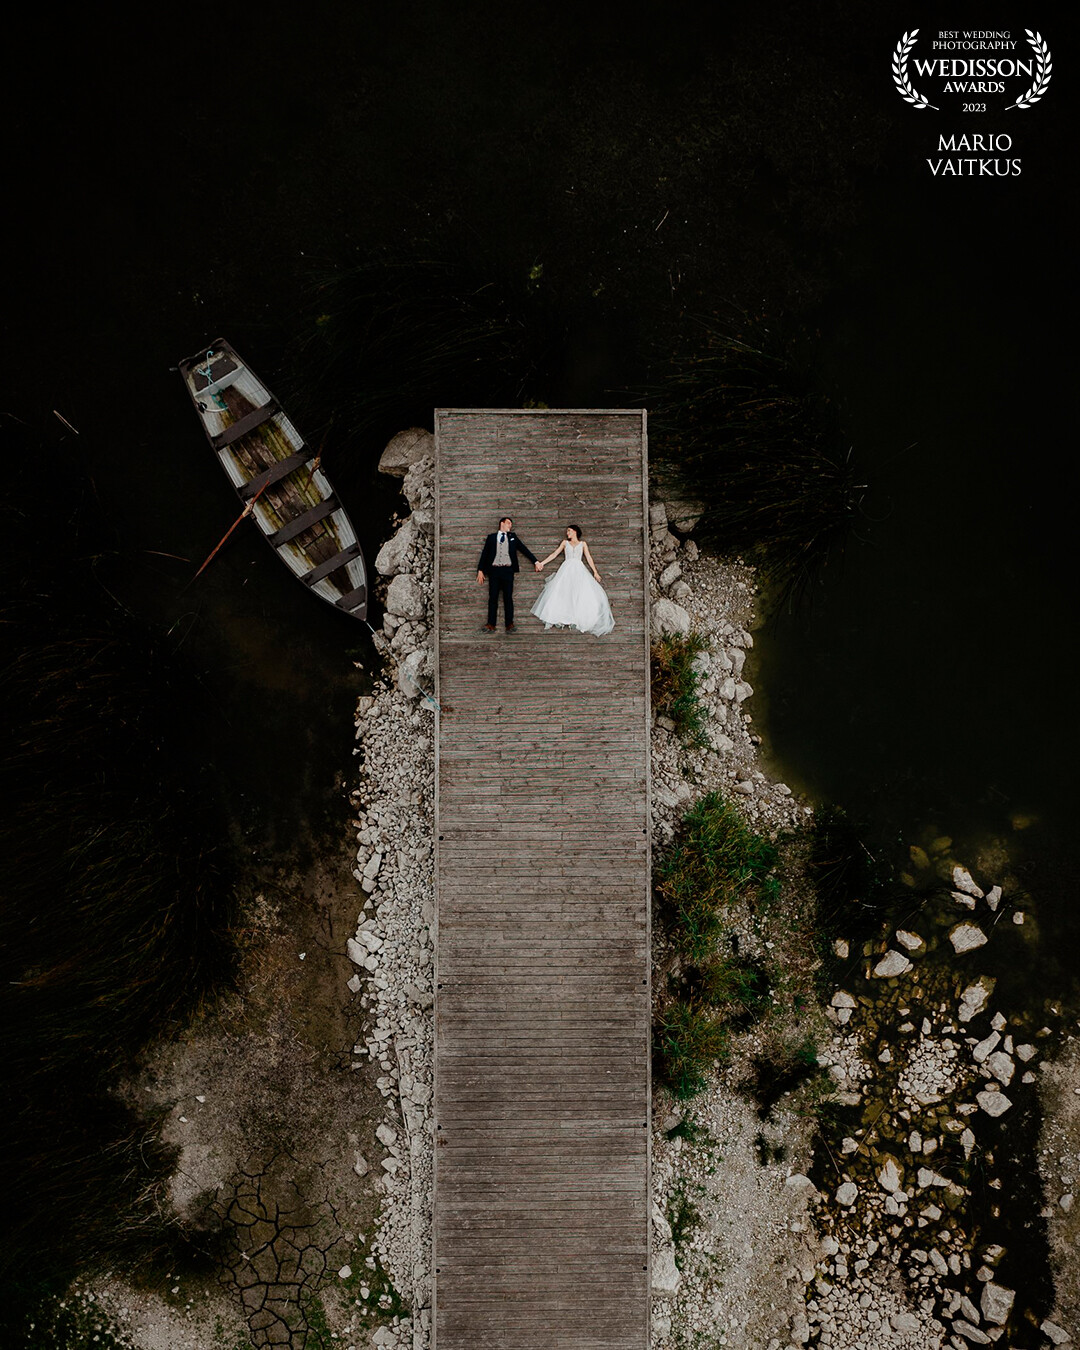 Baylor & Evan at Ashley Park, Ireland. I asked the bride and groom if they are crazy enough to laydown for an outstanding shot. They said: "Go on Mario what do we have to do?" And here is the result!